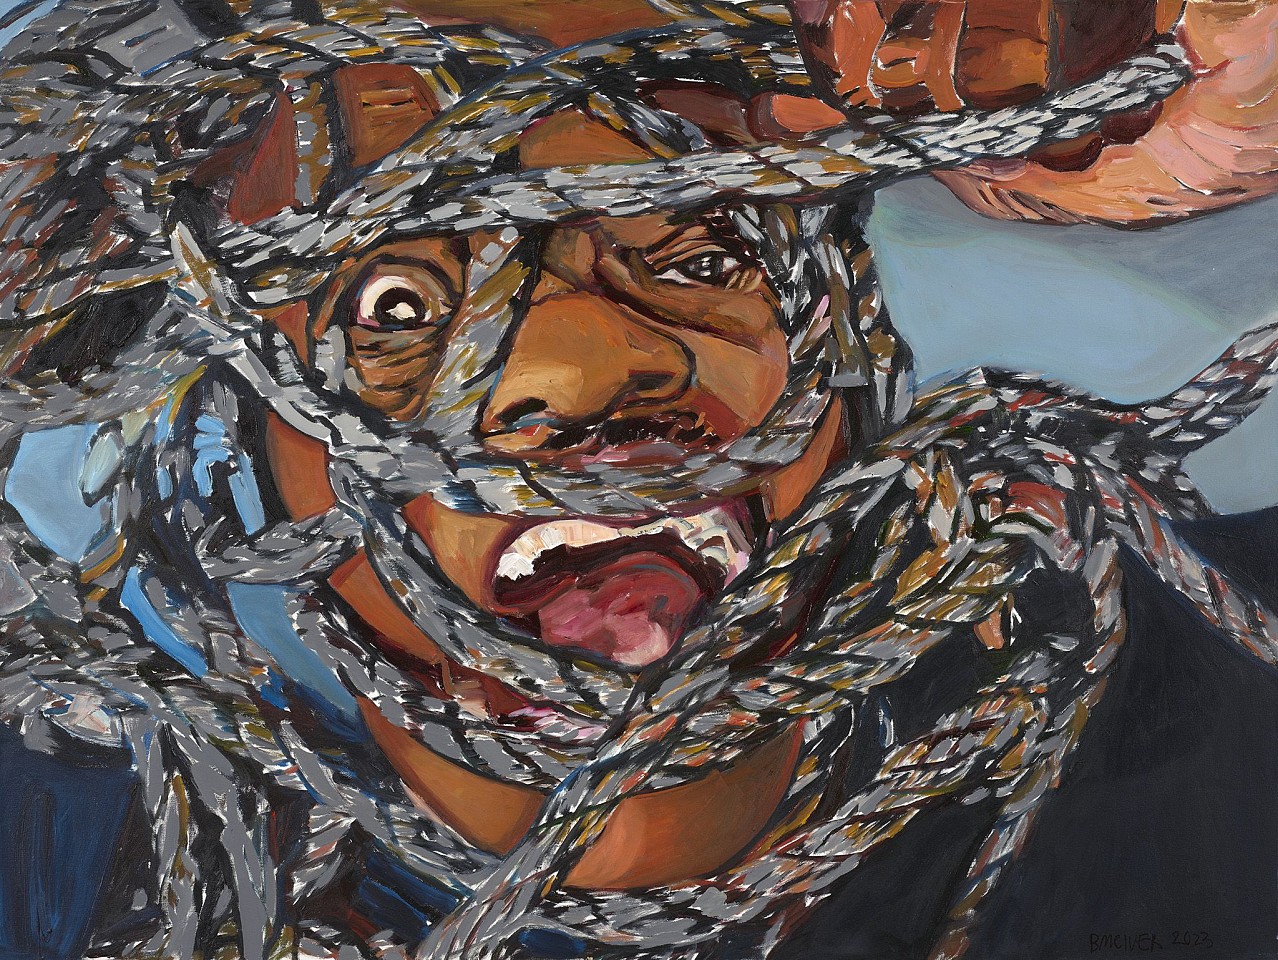 Beverly McIver, Untitled Ropes and Locks, 2023
Oil on canvas, 36 x 48 in. (91.4 x 121.9 cm)
MCI-00024